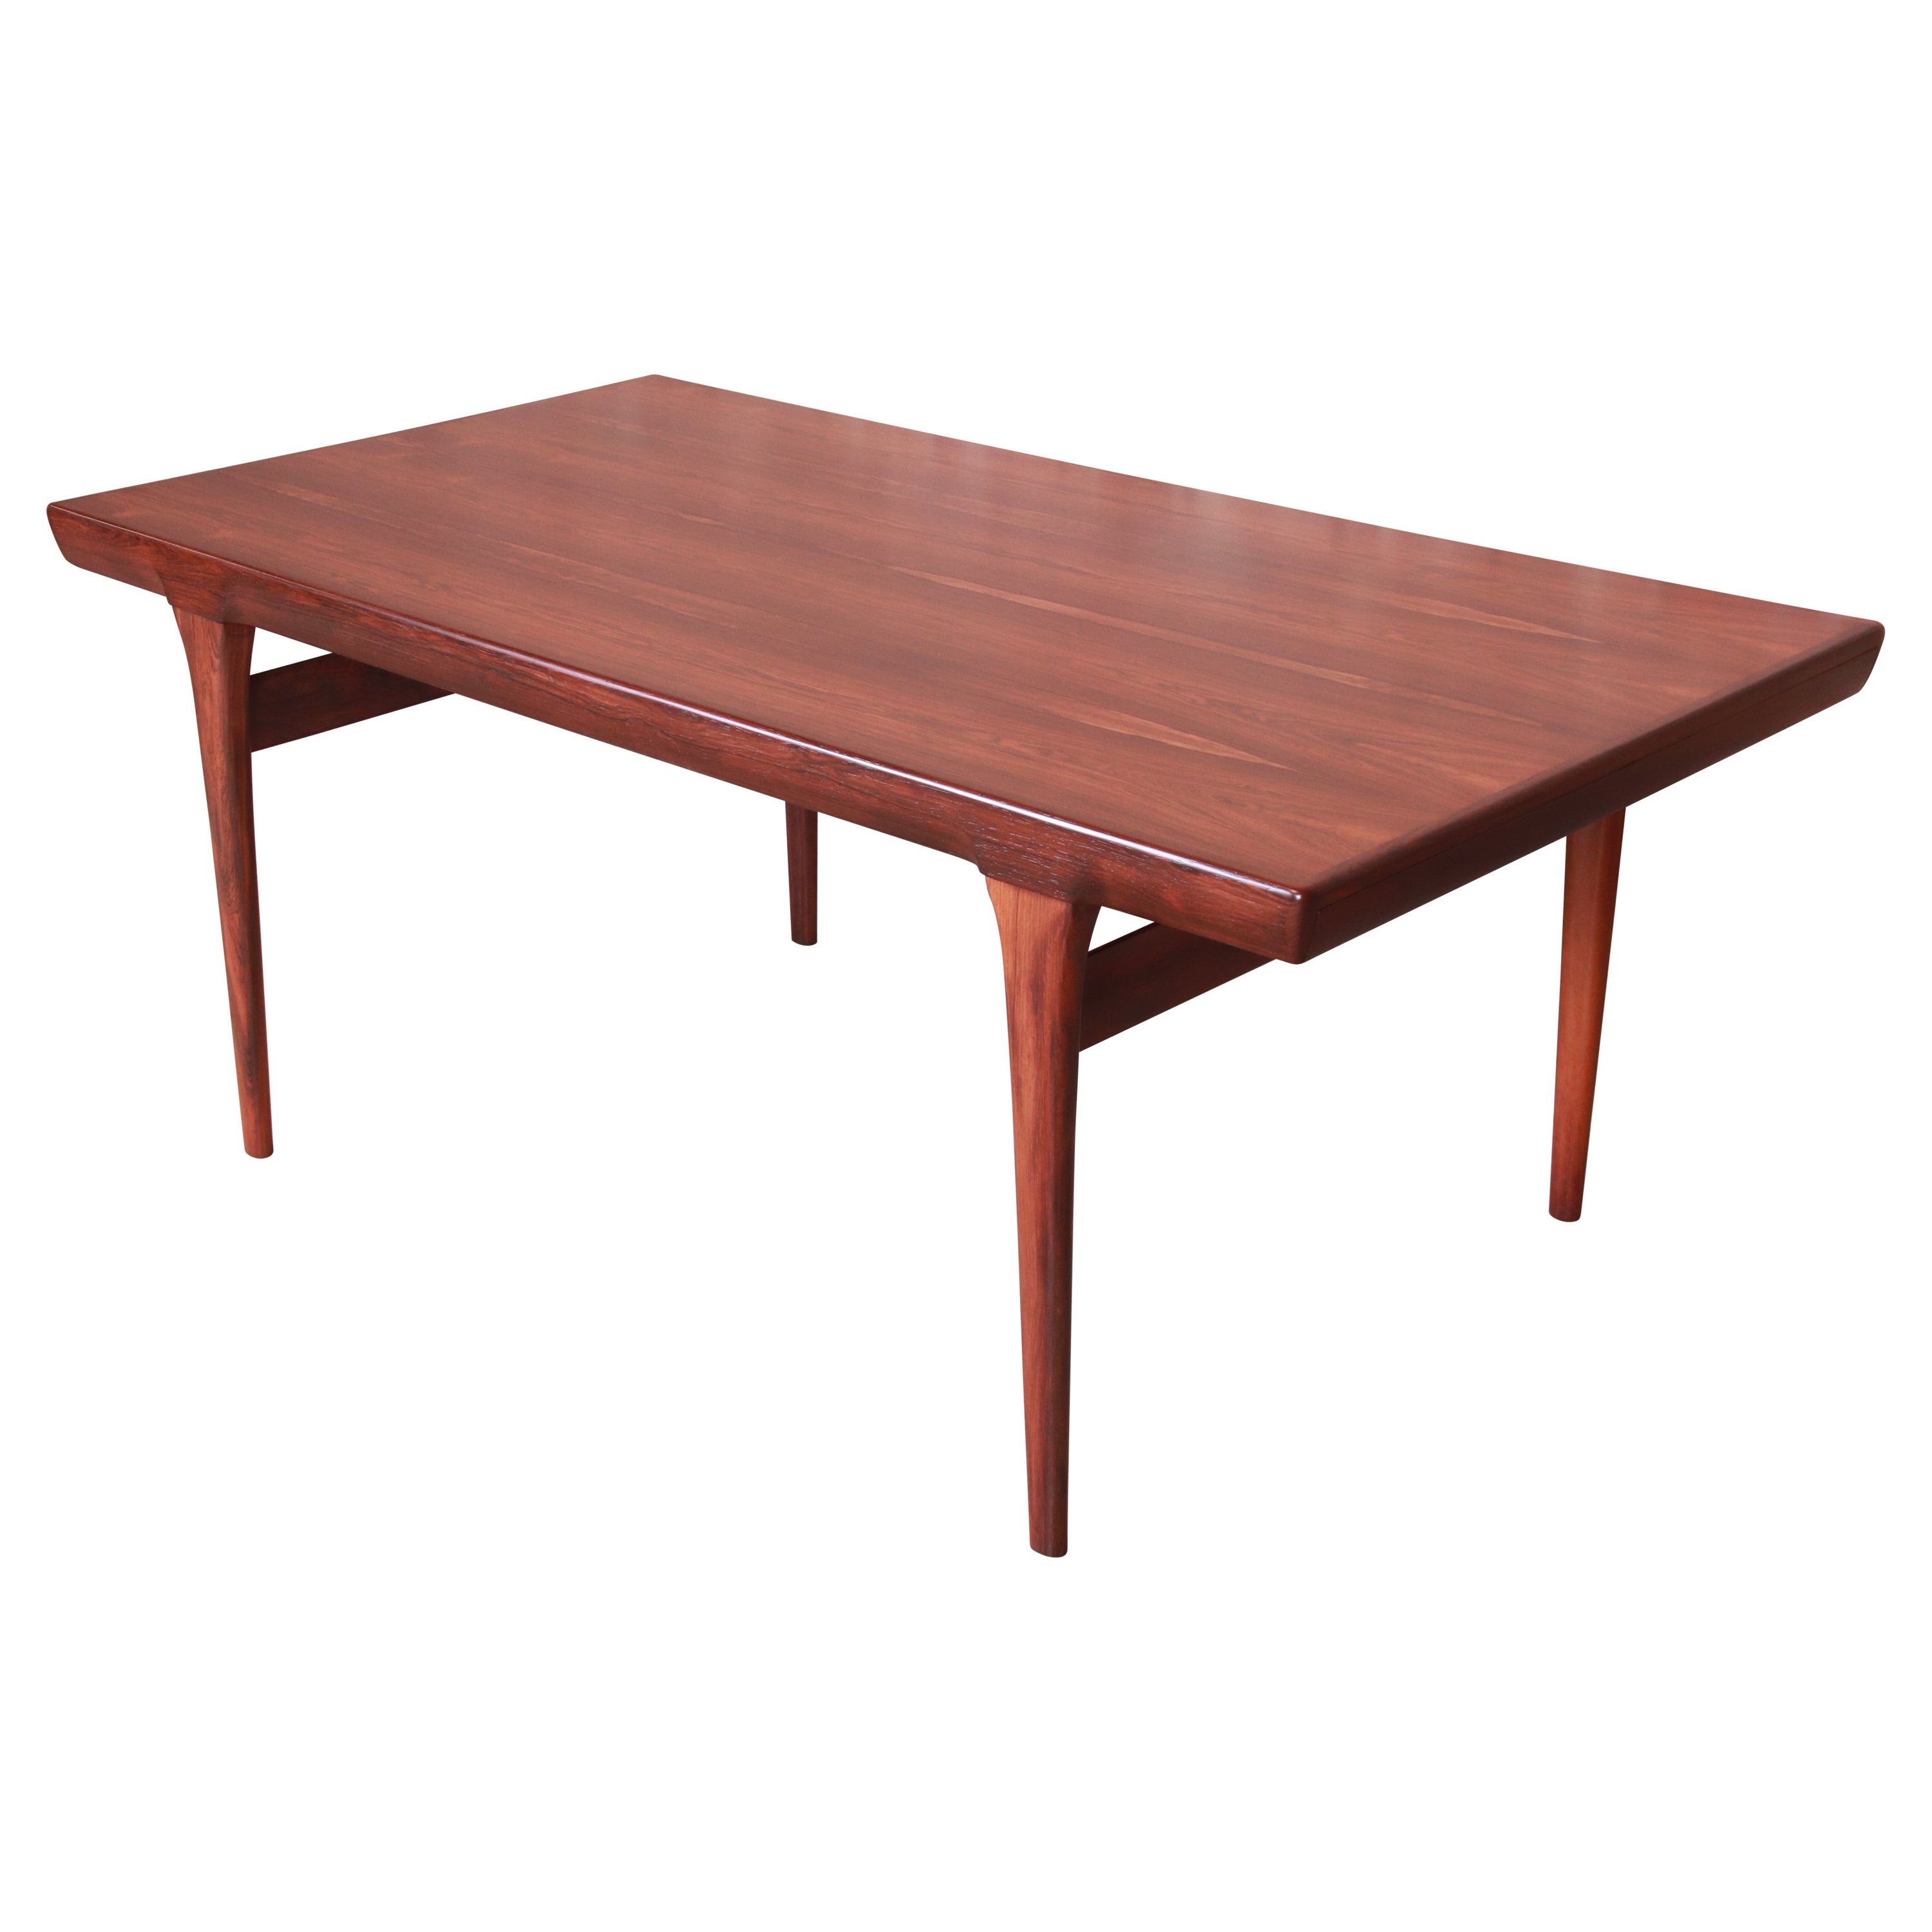 Ib Kofod-Larsen for Faarup Danish Modern Rosewood Dining Table, Newly Refinished